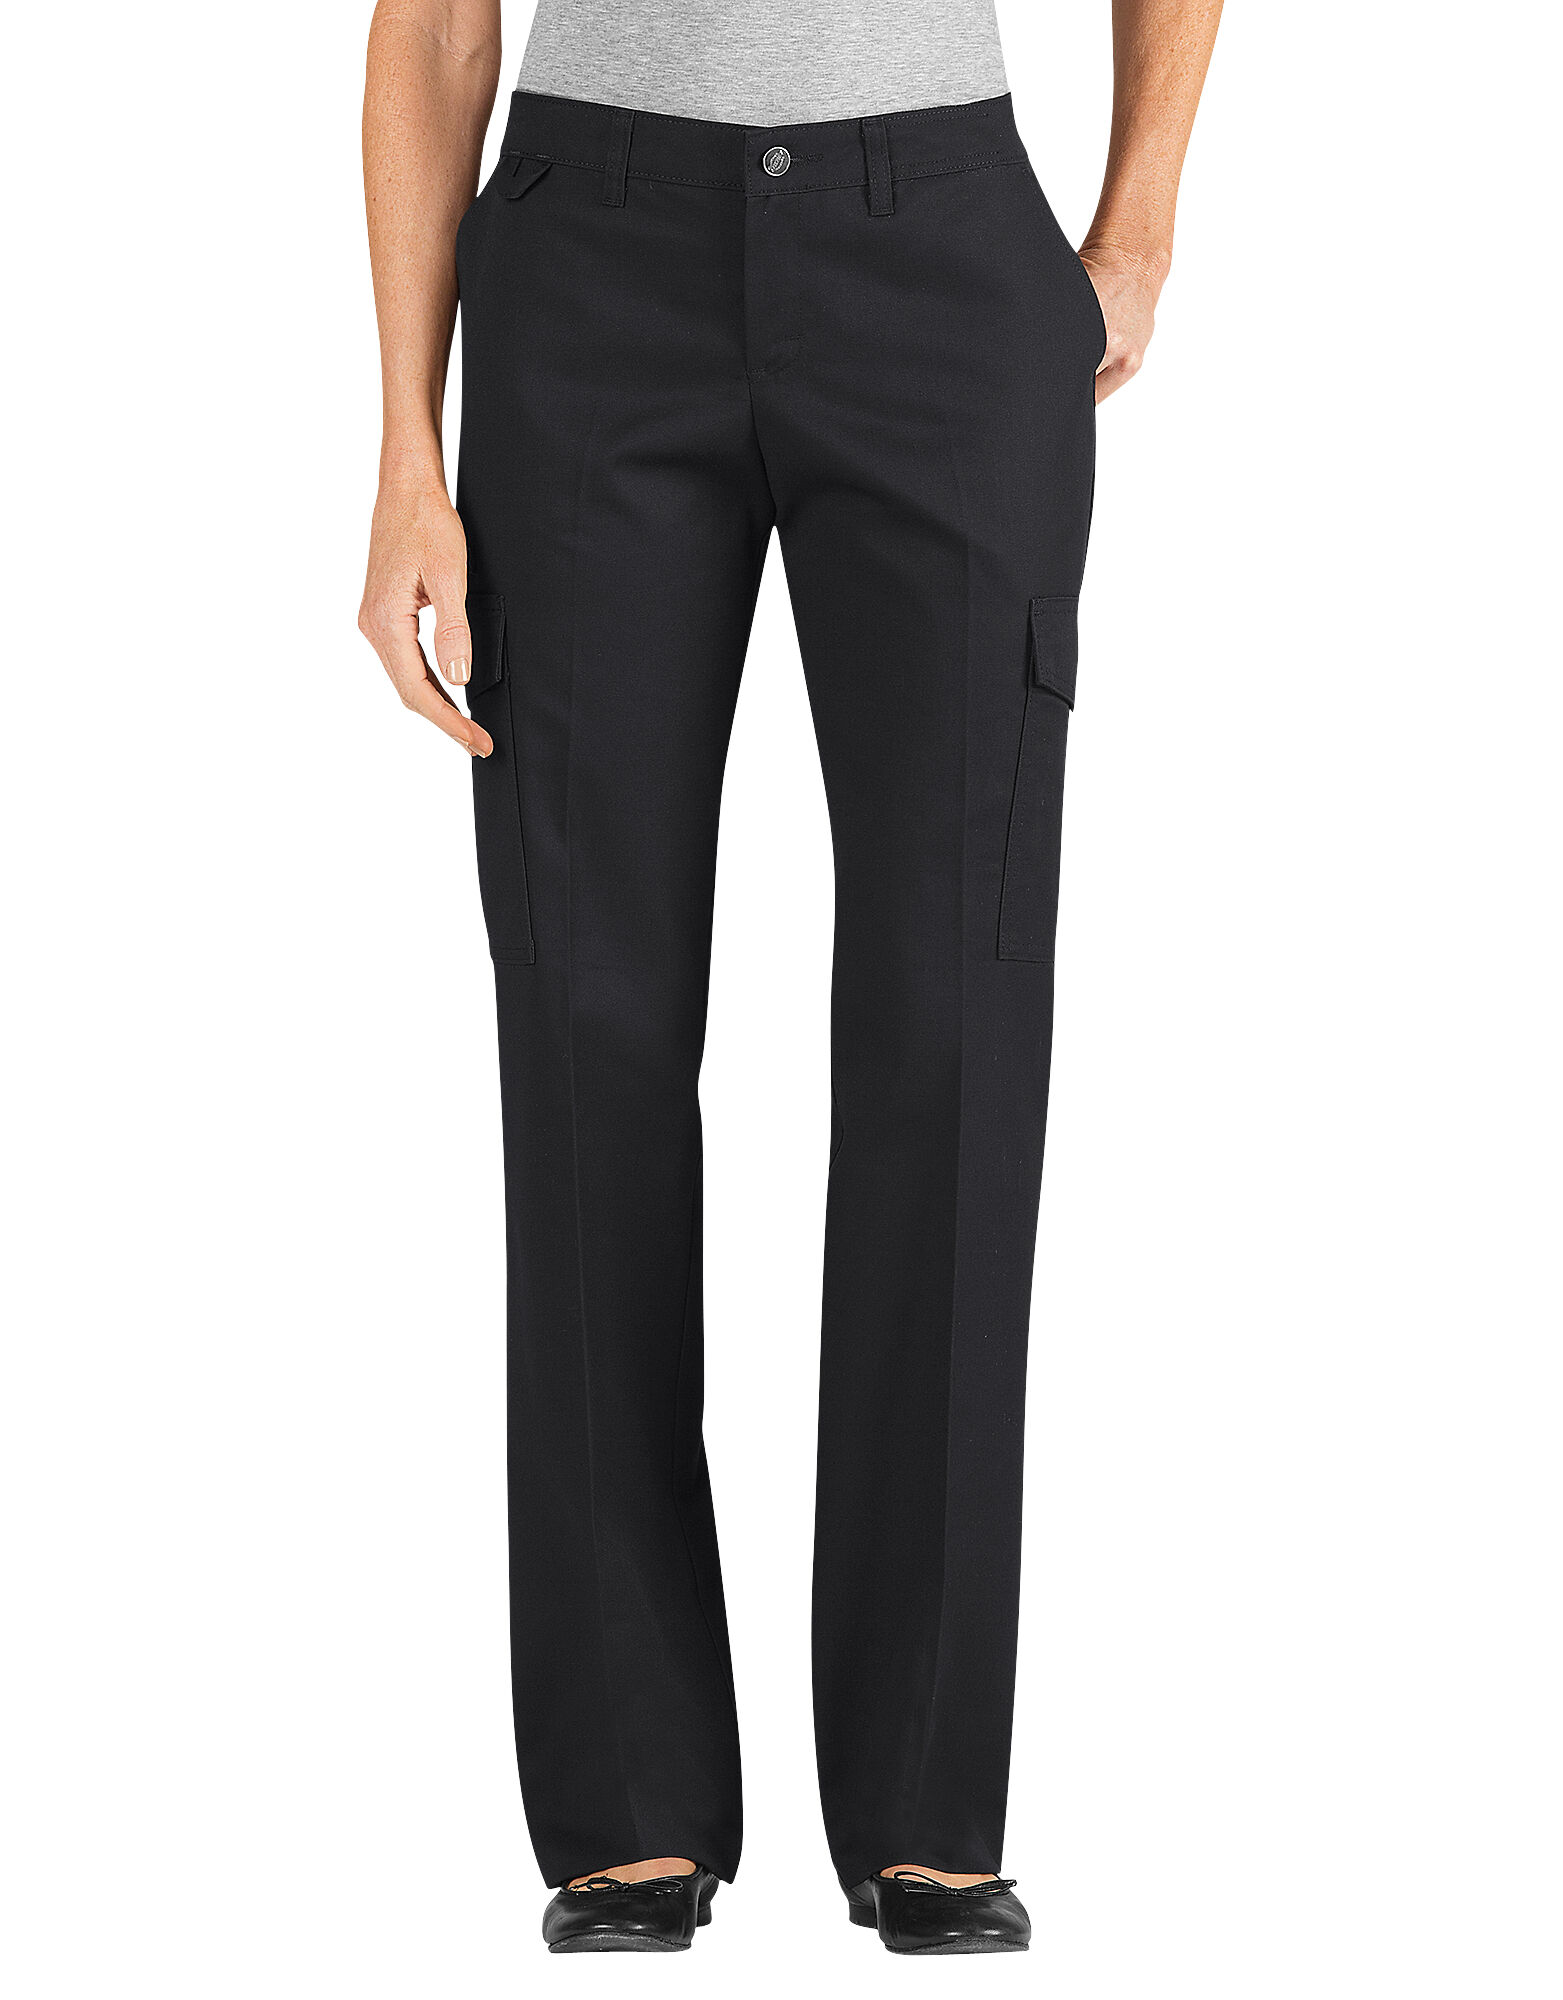 Women's Relaxed Straight Server Cargo Pants | Women's Pants | Dickies